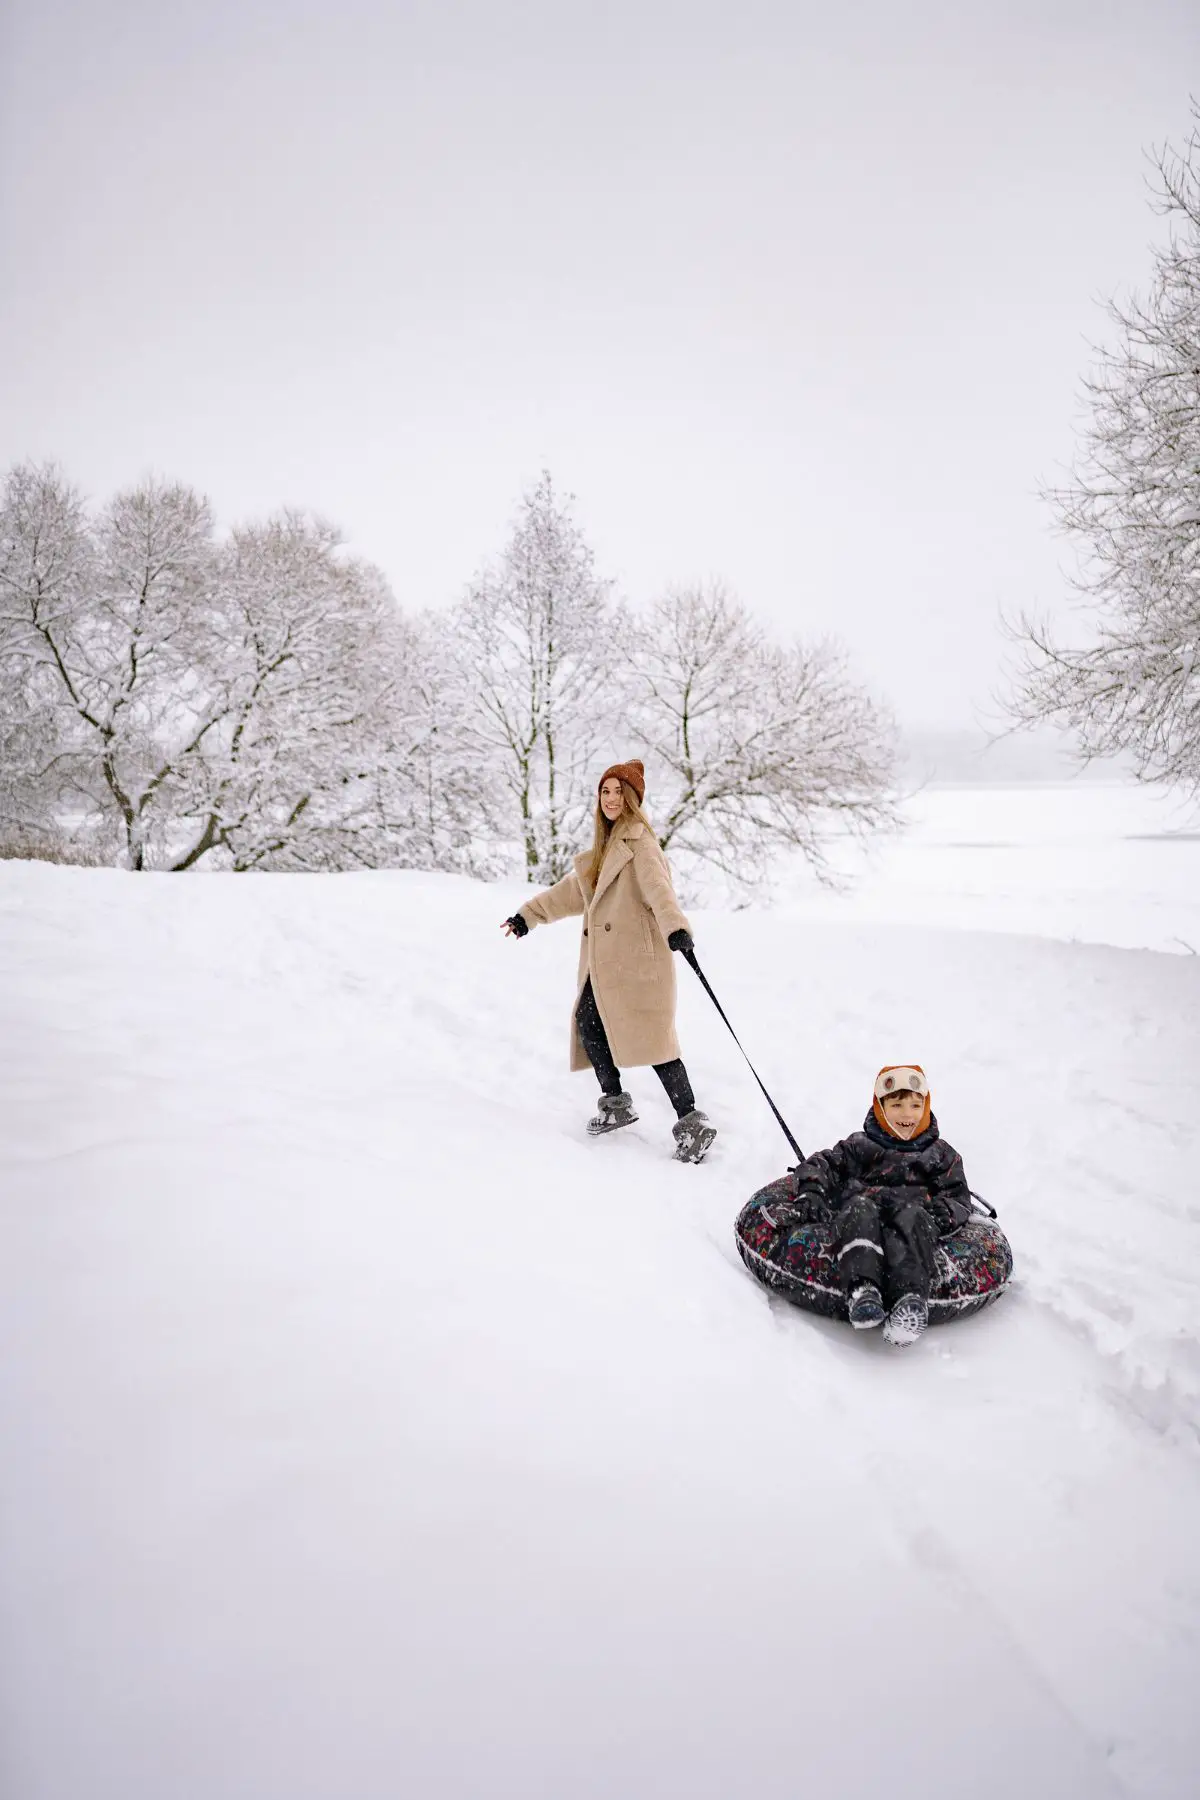 This is a photo of a mom pulling her son in a tube.  They are on a hill.  The mom is wearing a tan peat coat and the son is wearing a black snow suit.  